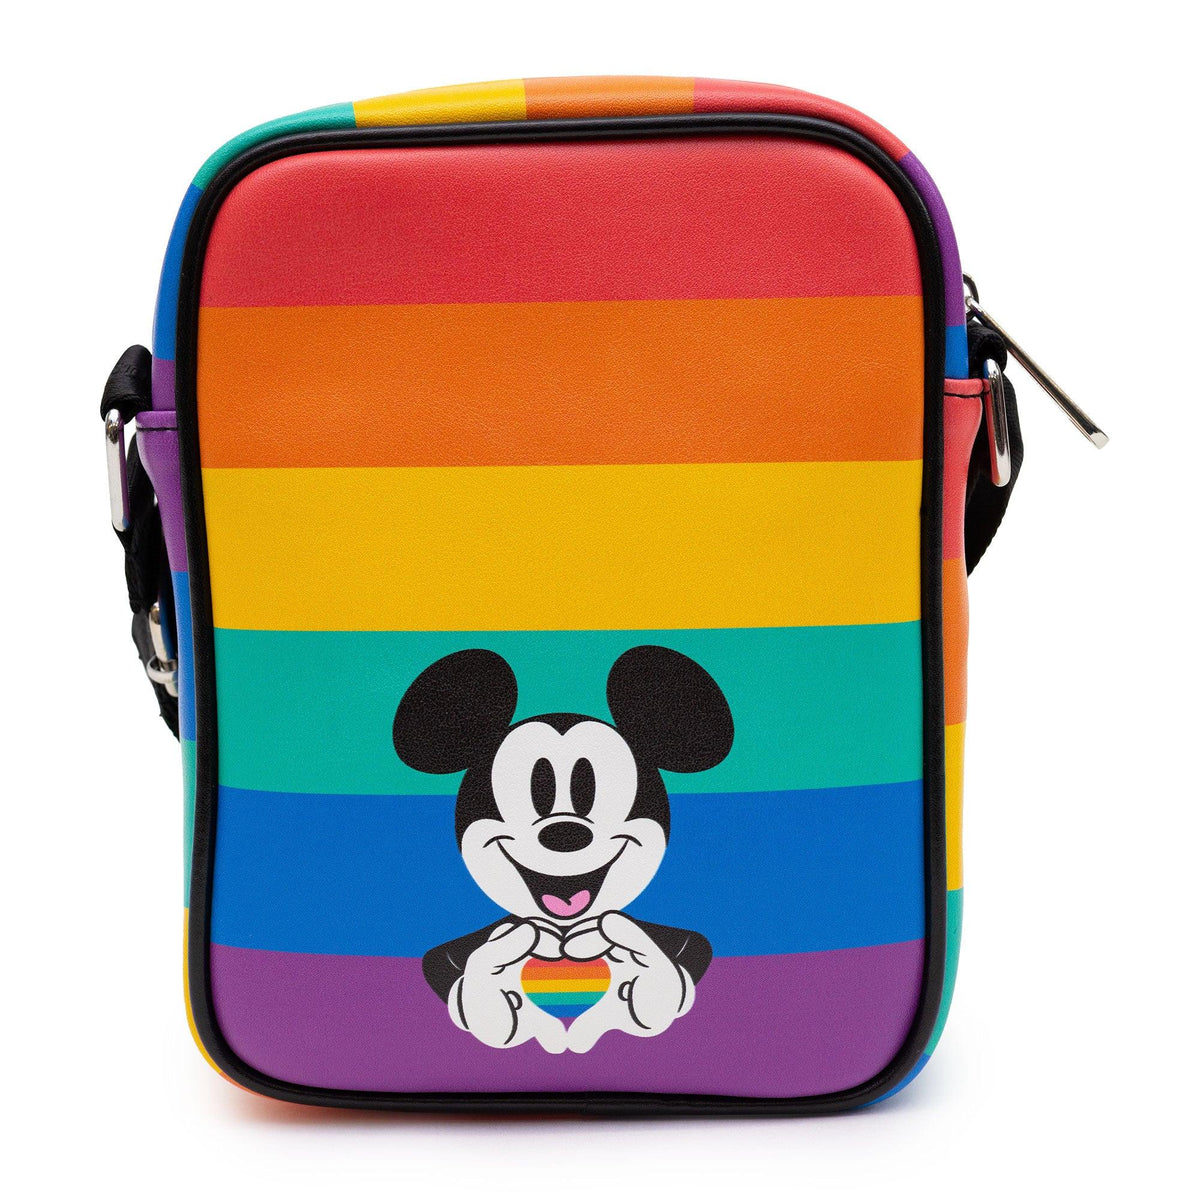 Disney: Mickey Mouse Rainbow Bag and Wallet Set